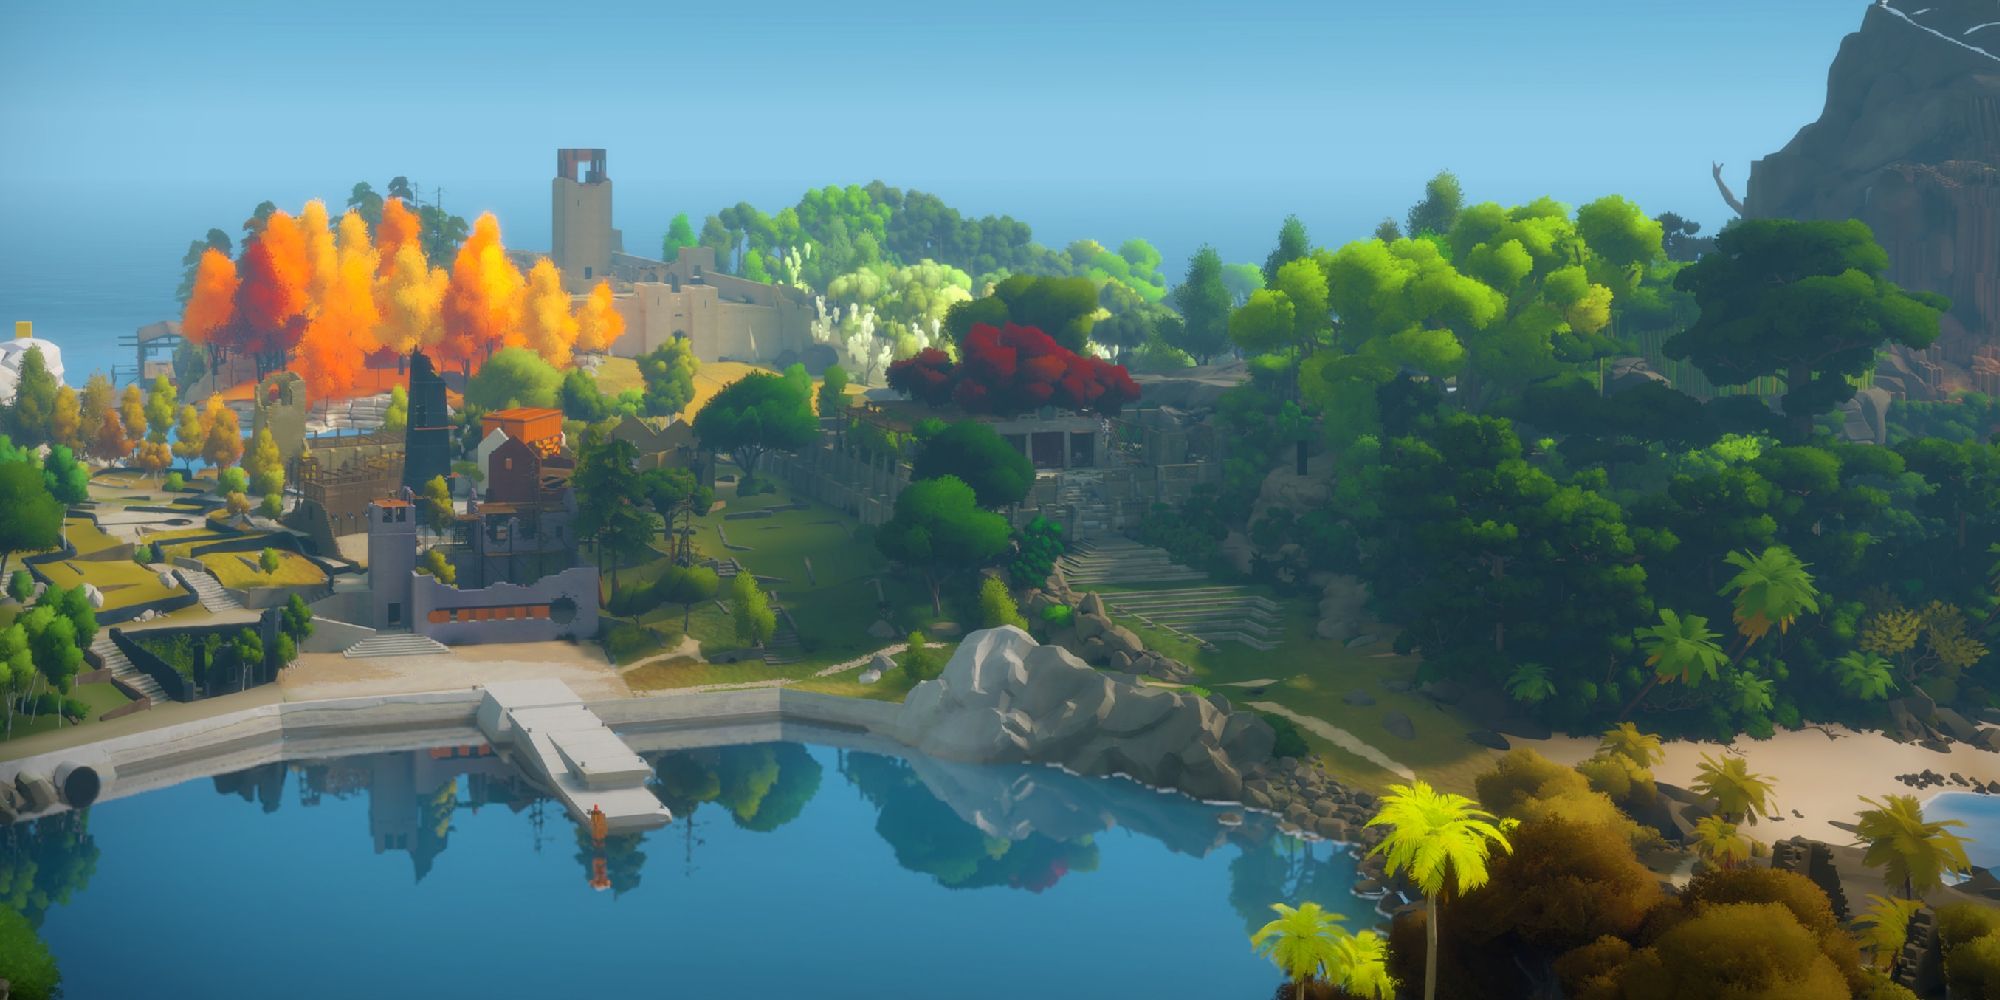 scenery of the island in The Witness